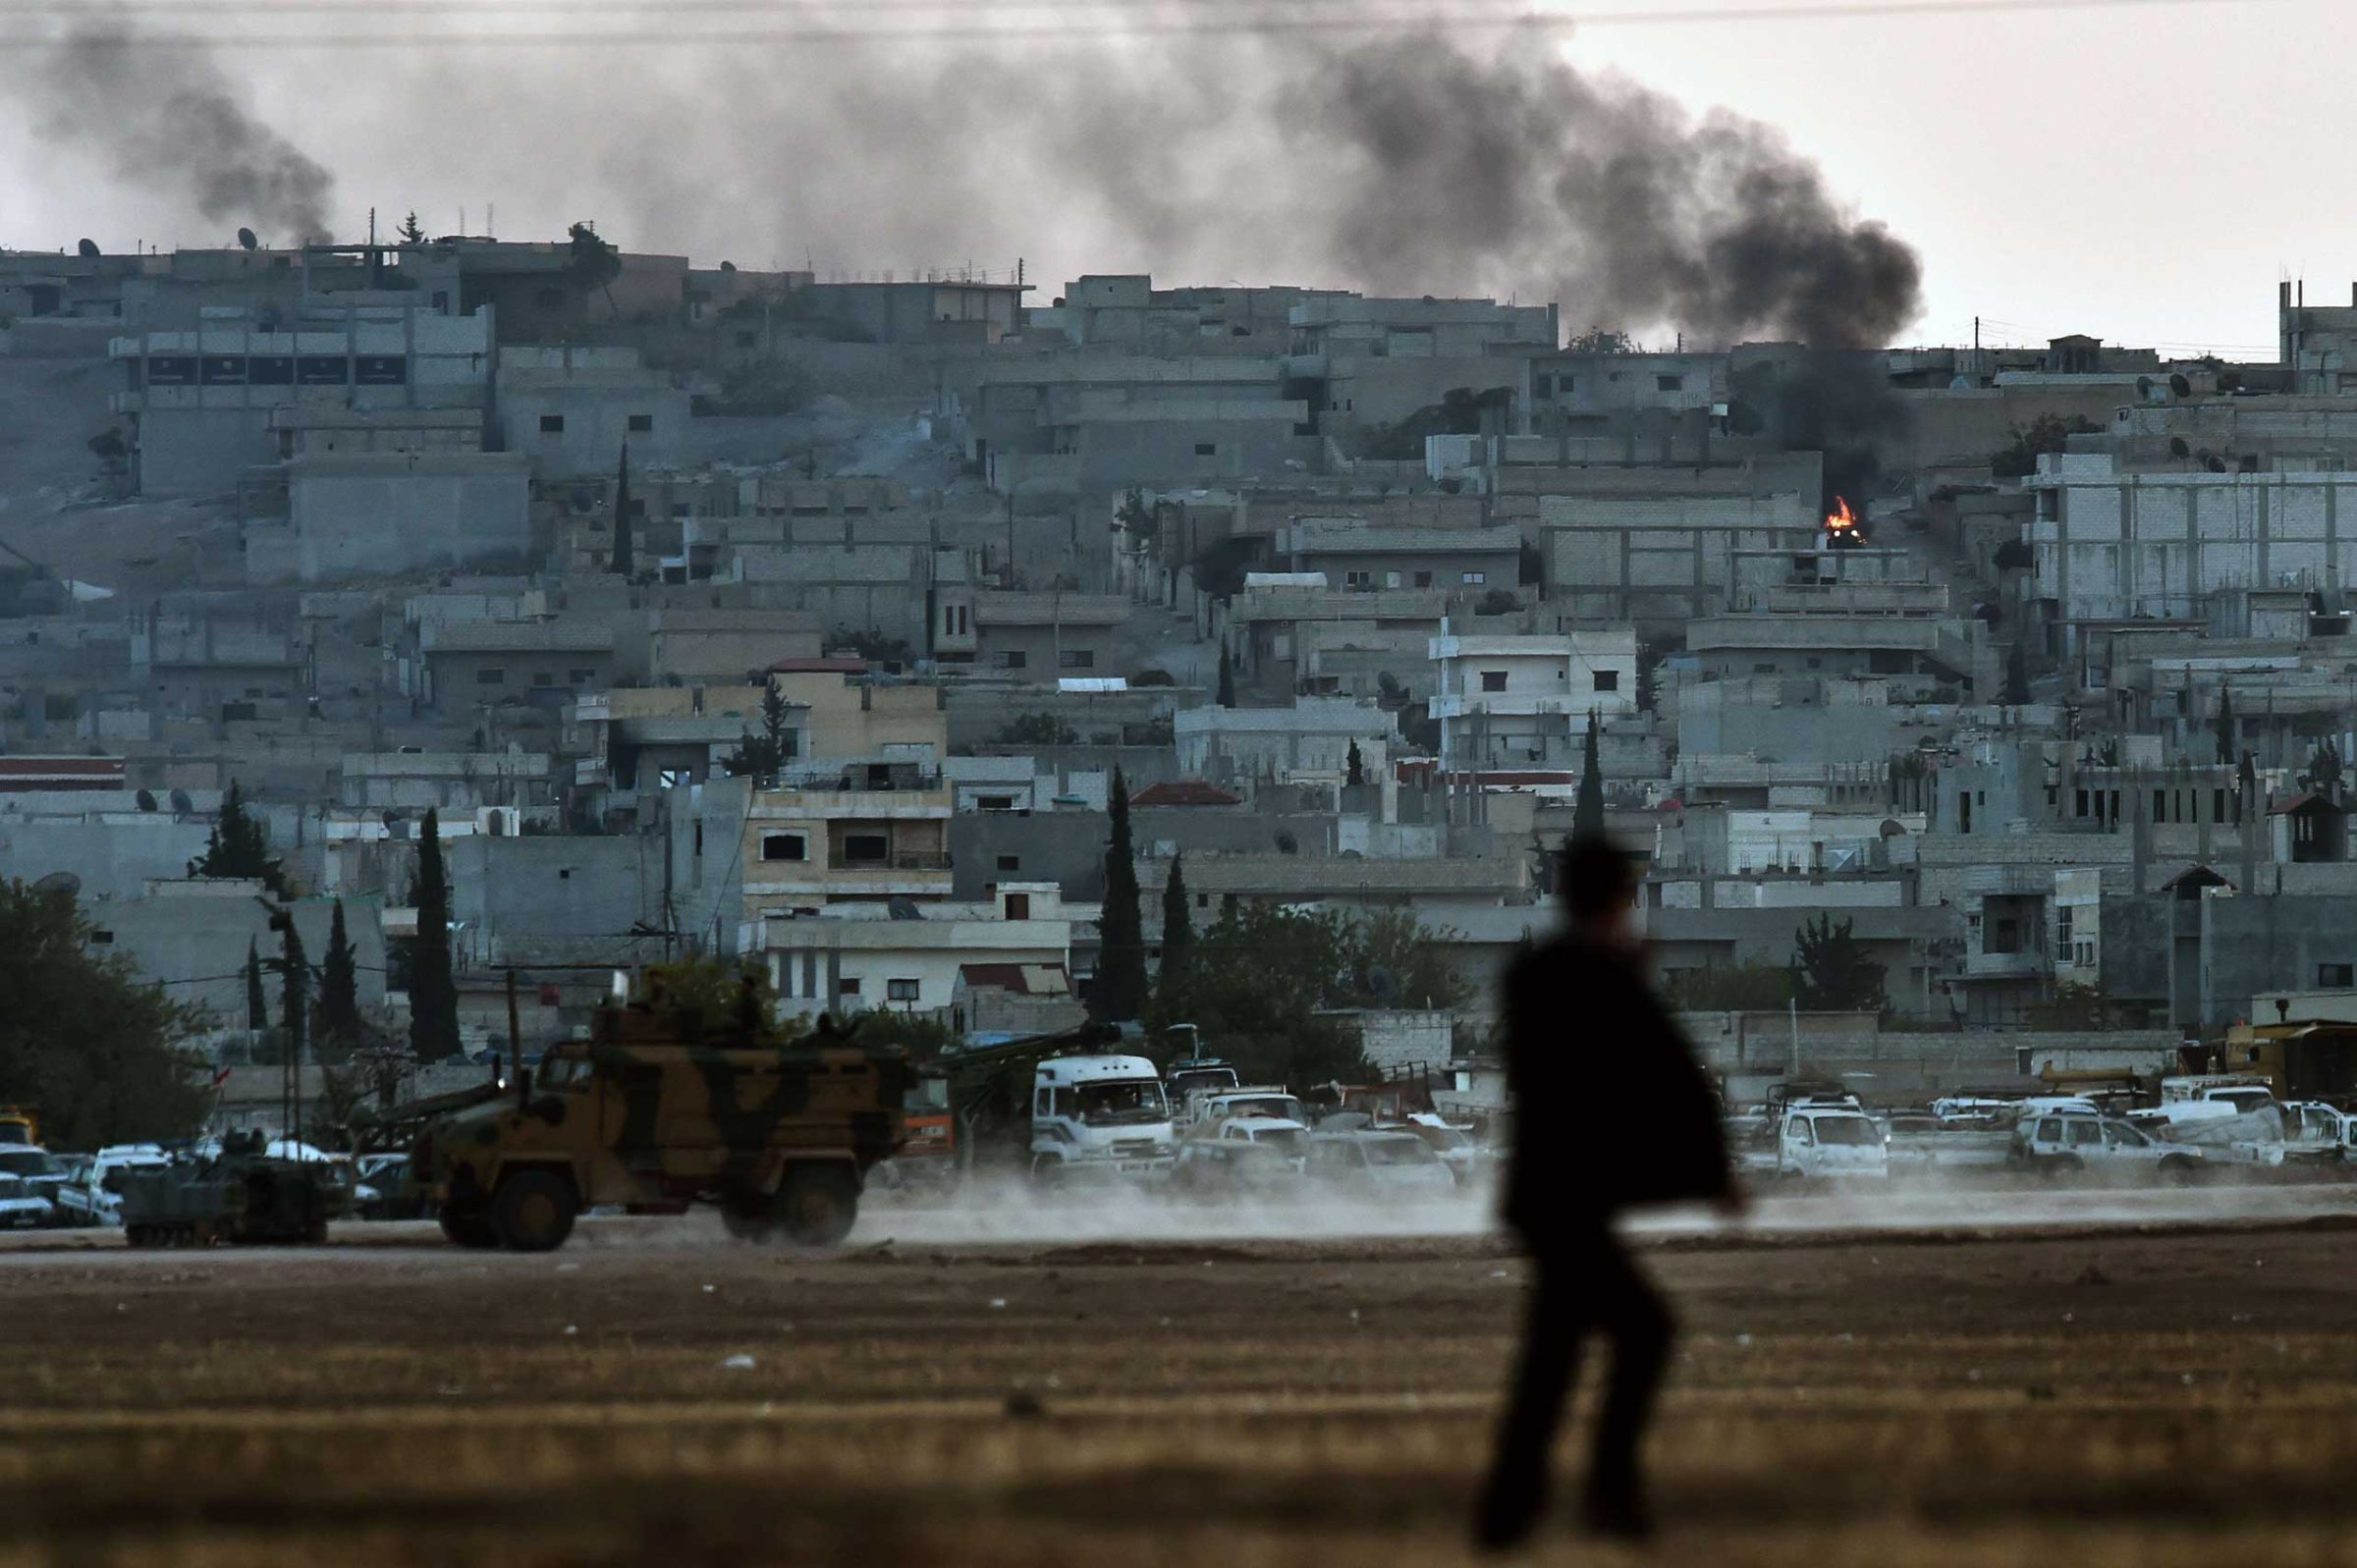 Smoke rises from the city centre of the Syrian town of Ain al-Arab, known as Kobani by the Kurds, as seen from the Turkish-Syrian border during heavy fighting, in the southeastern town of Suruc, Sanliurfa province, Turkey, on Oct. 7, 2014.